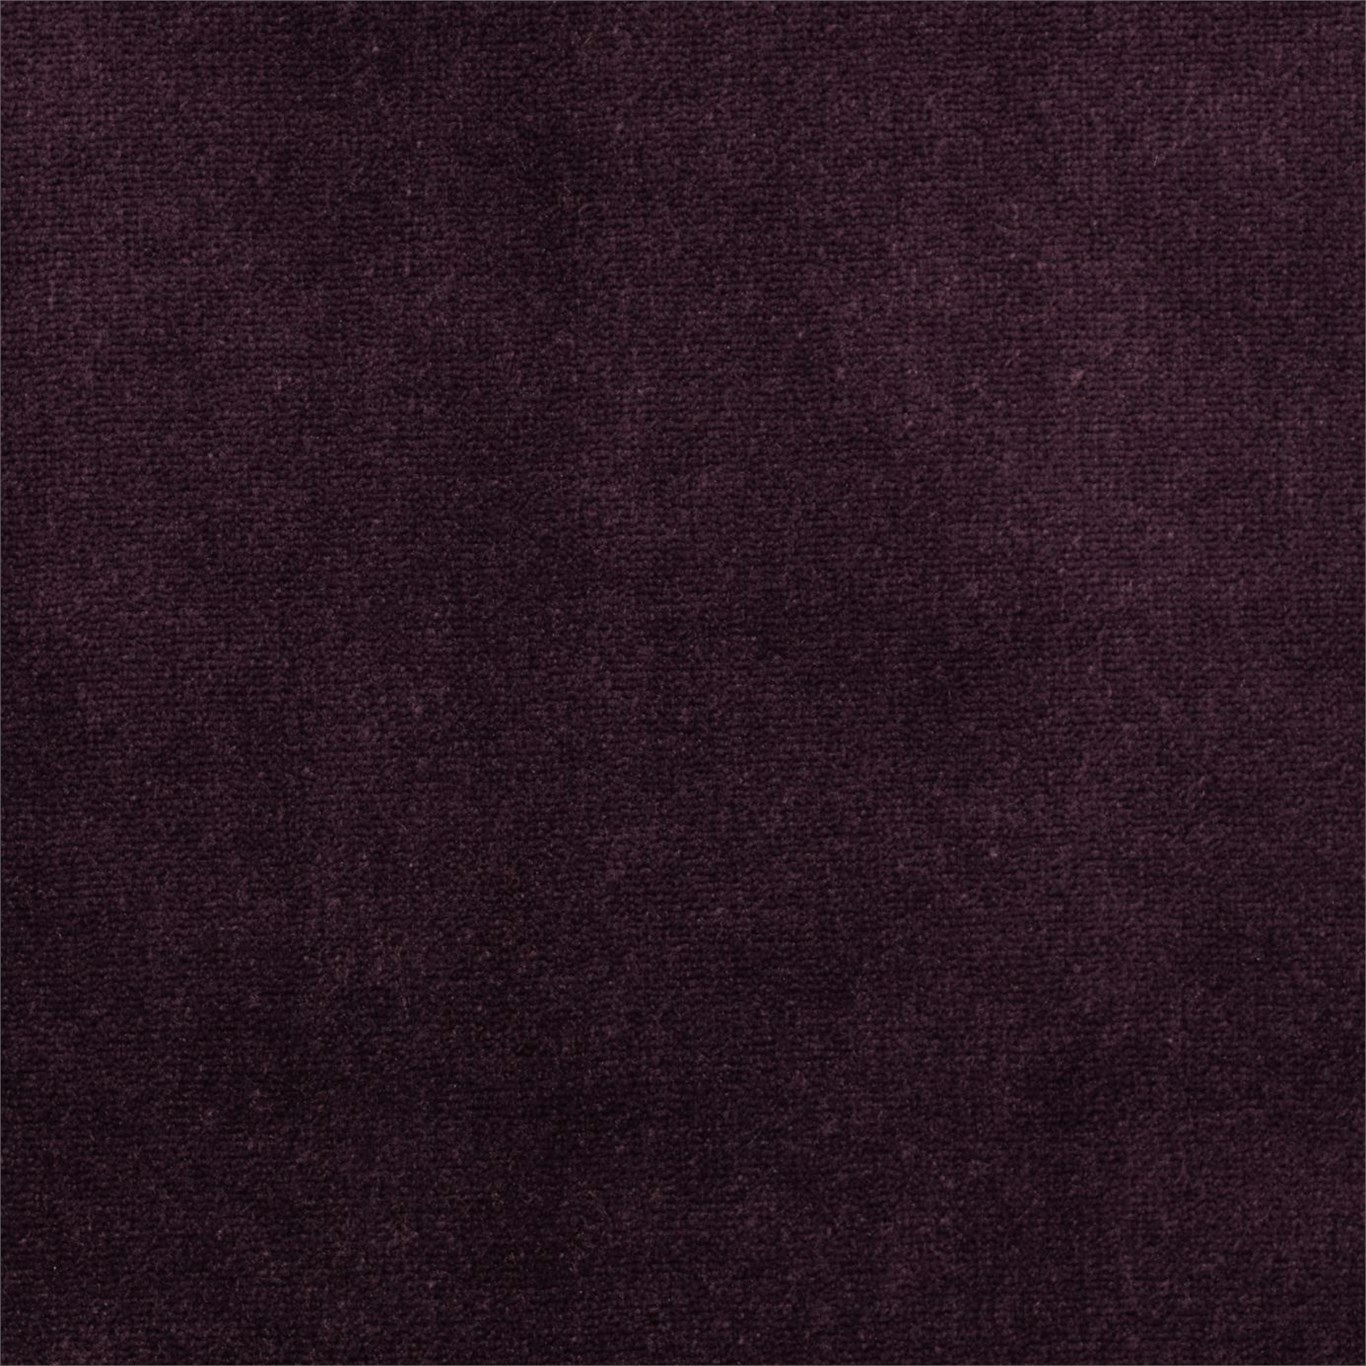 Anthology Veda Plum Fabric by HAR